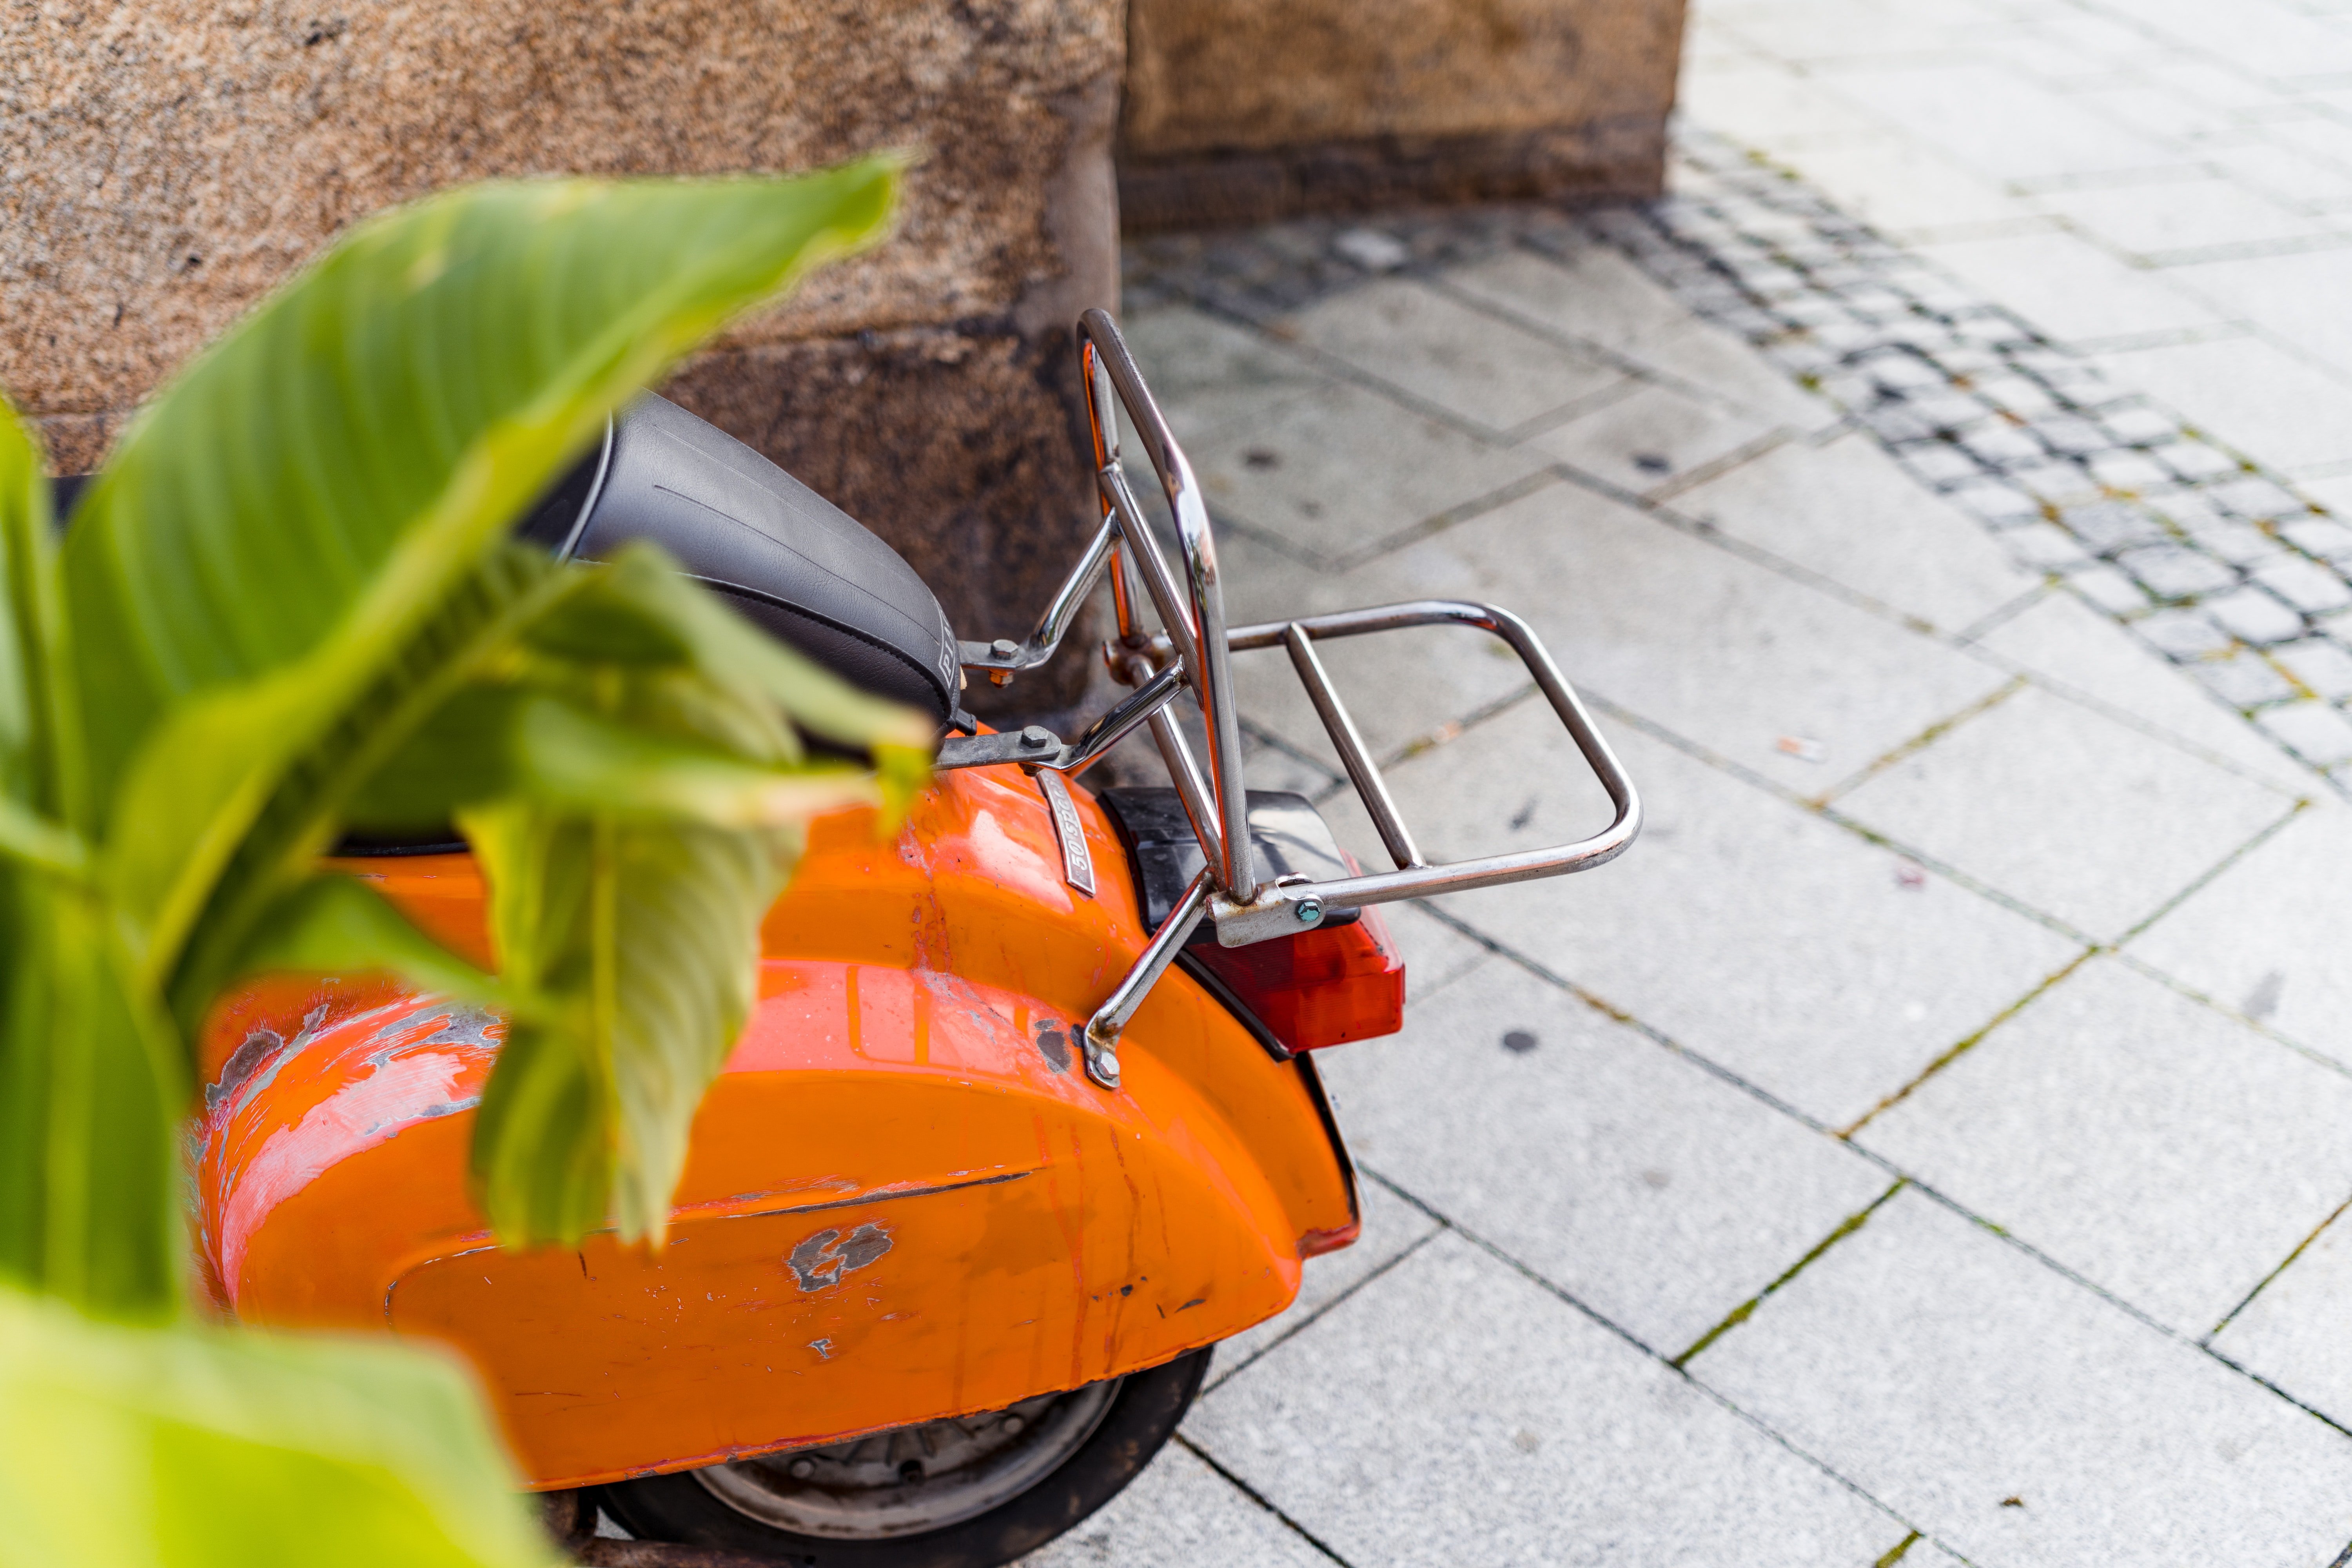 When Paul saw Stephen struggling to park the scooter, he helped him. | Source: Unsplash